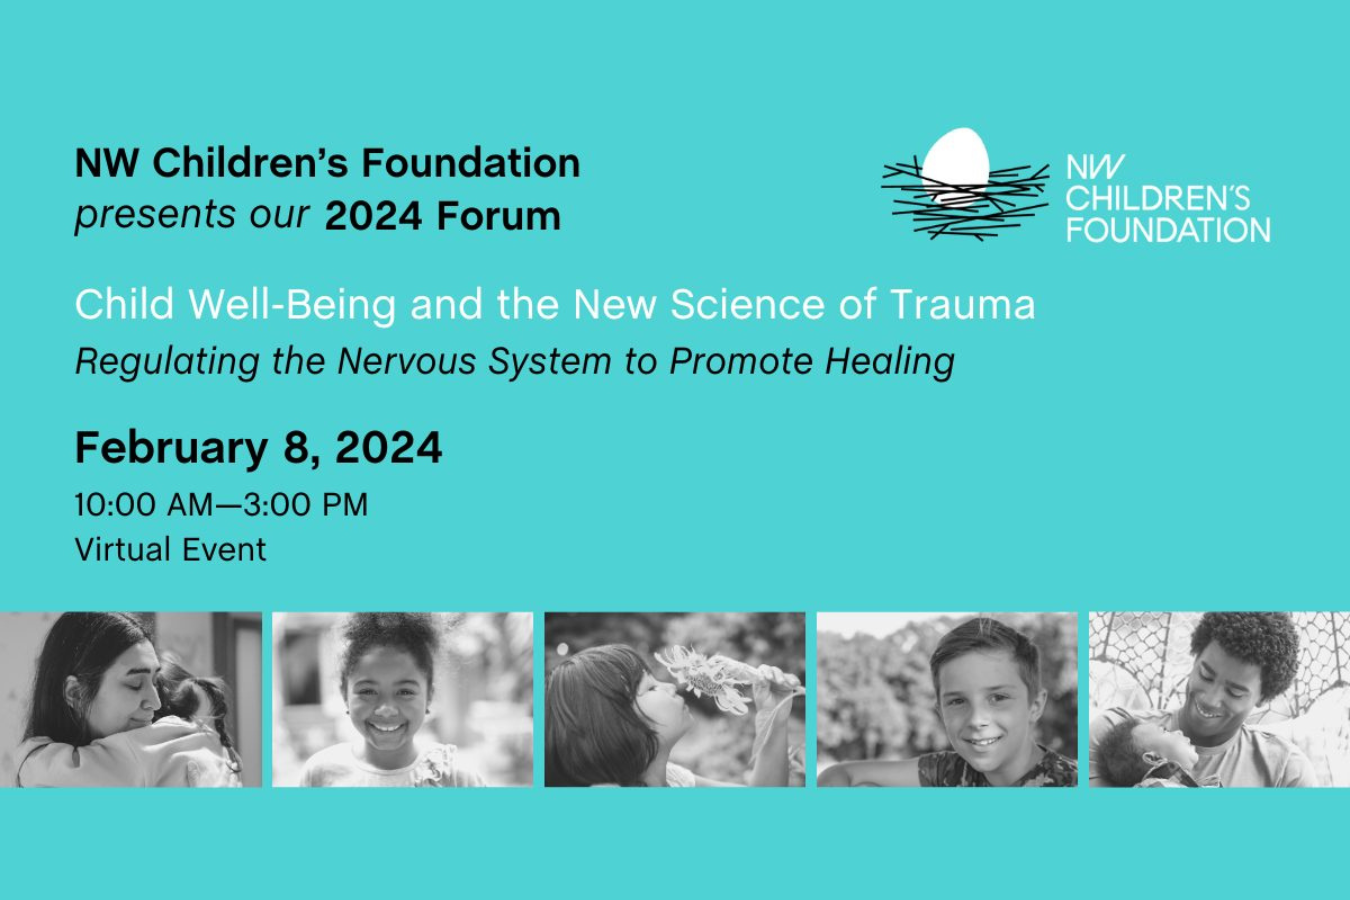 Light blue background. Title on top left "NW Children's Foundation presents our 2024 Forum" with NW children's Foundation logo top right. Centered in the middle says "Child Well-Being and the New Science of Trauma" with the date, time and photos of kids.